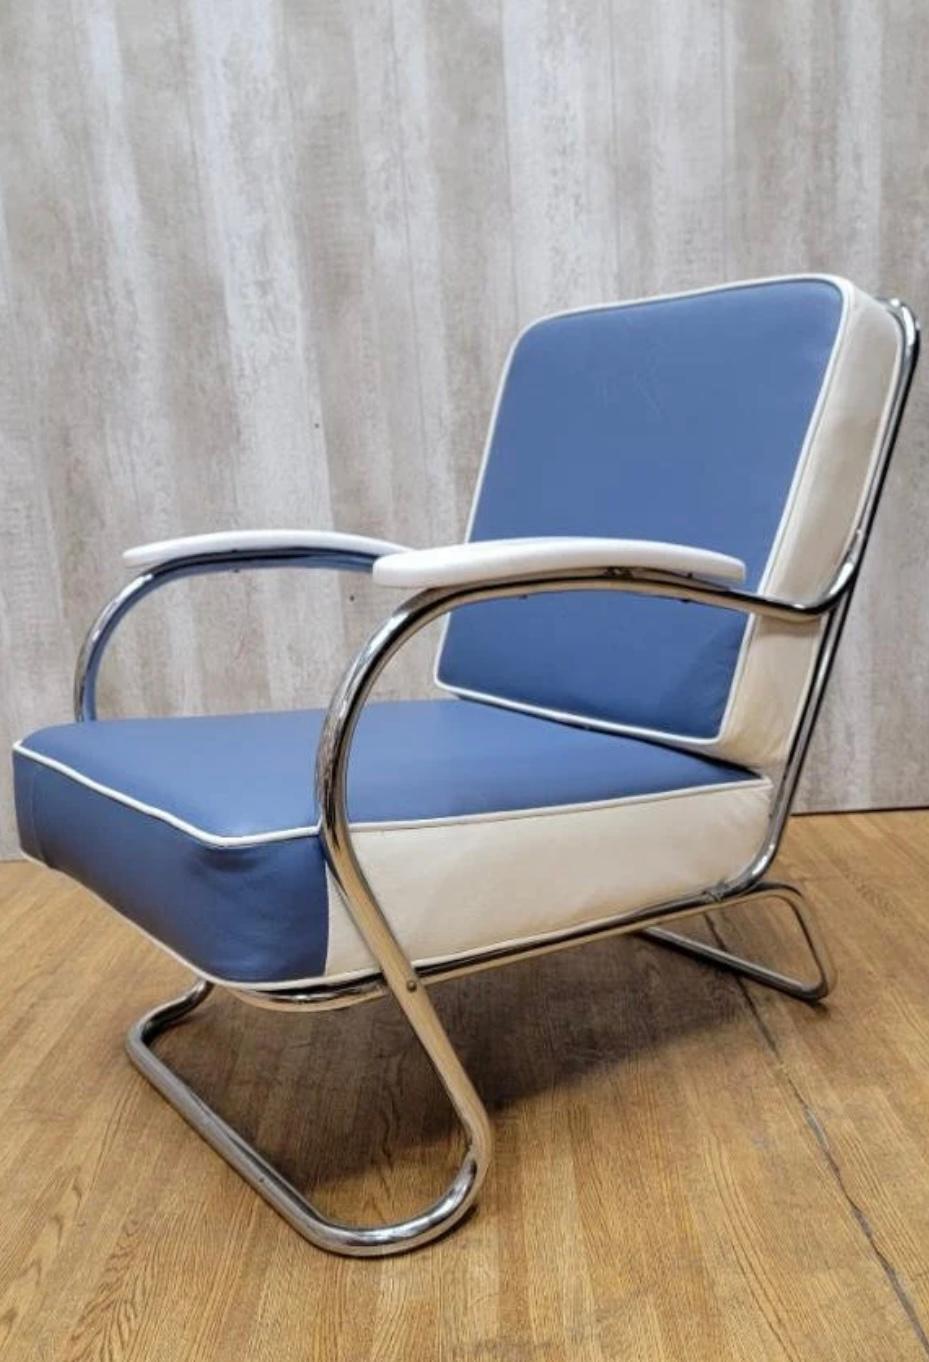 American Art Deco Mucke-Melder Tubular Steel Lounge Chair Newly Upholstered in Leather For Sale